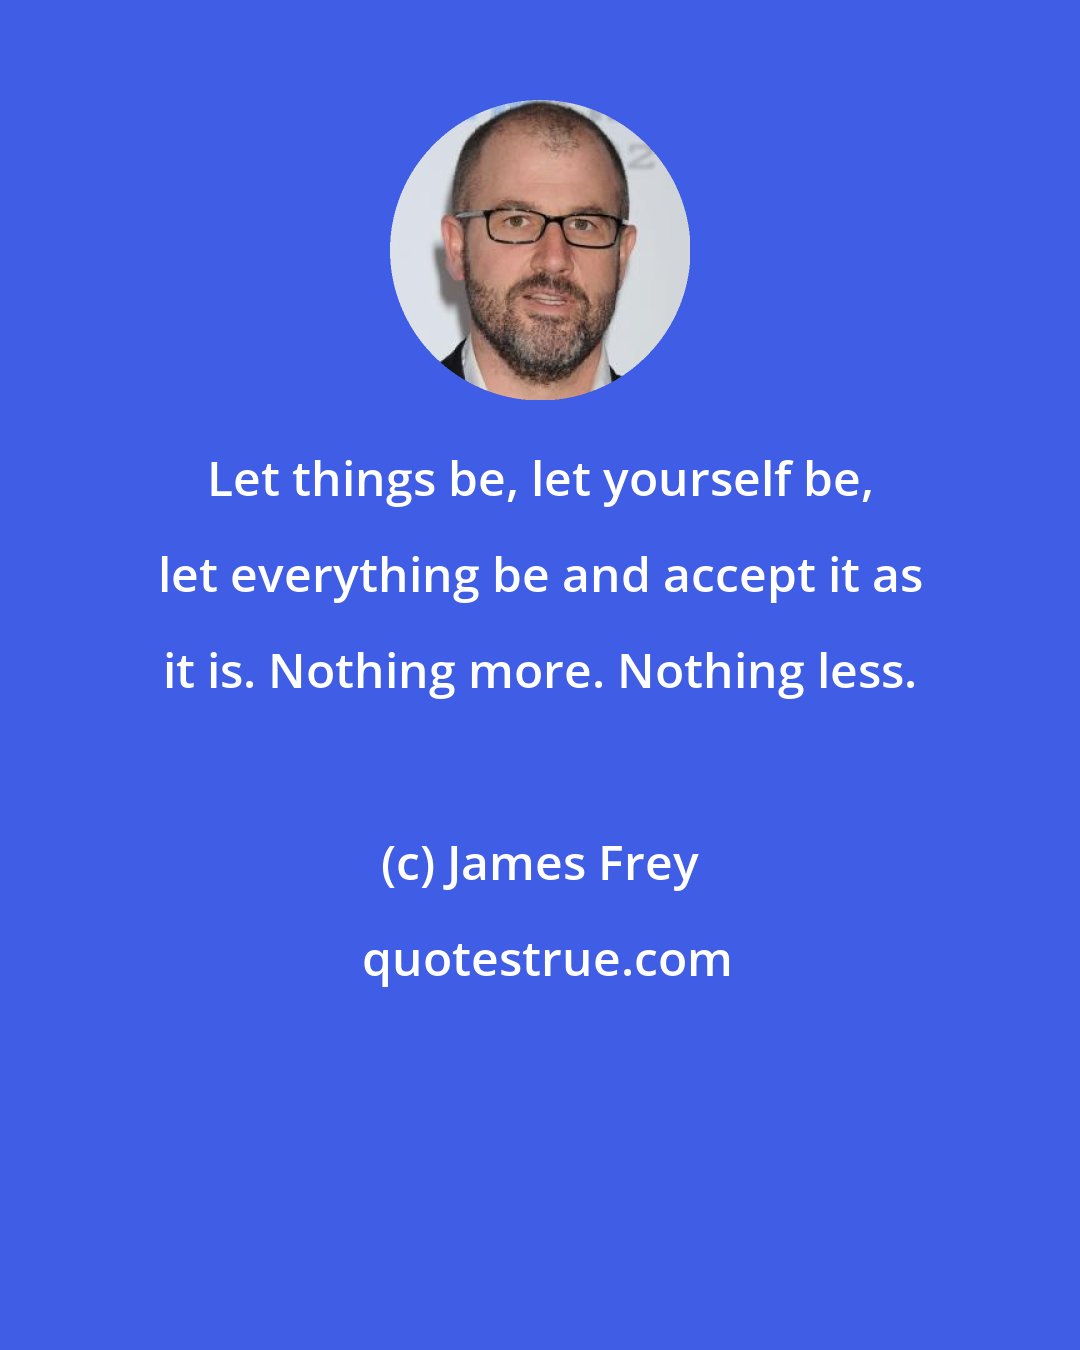 James Frey: Let things be, let yourself be, let everything be and accept it as it is. Nothing more. Nothing less.